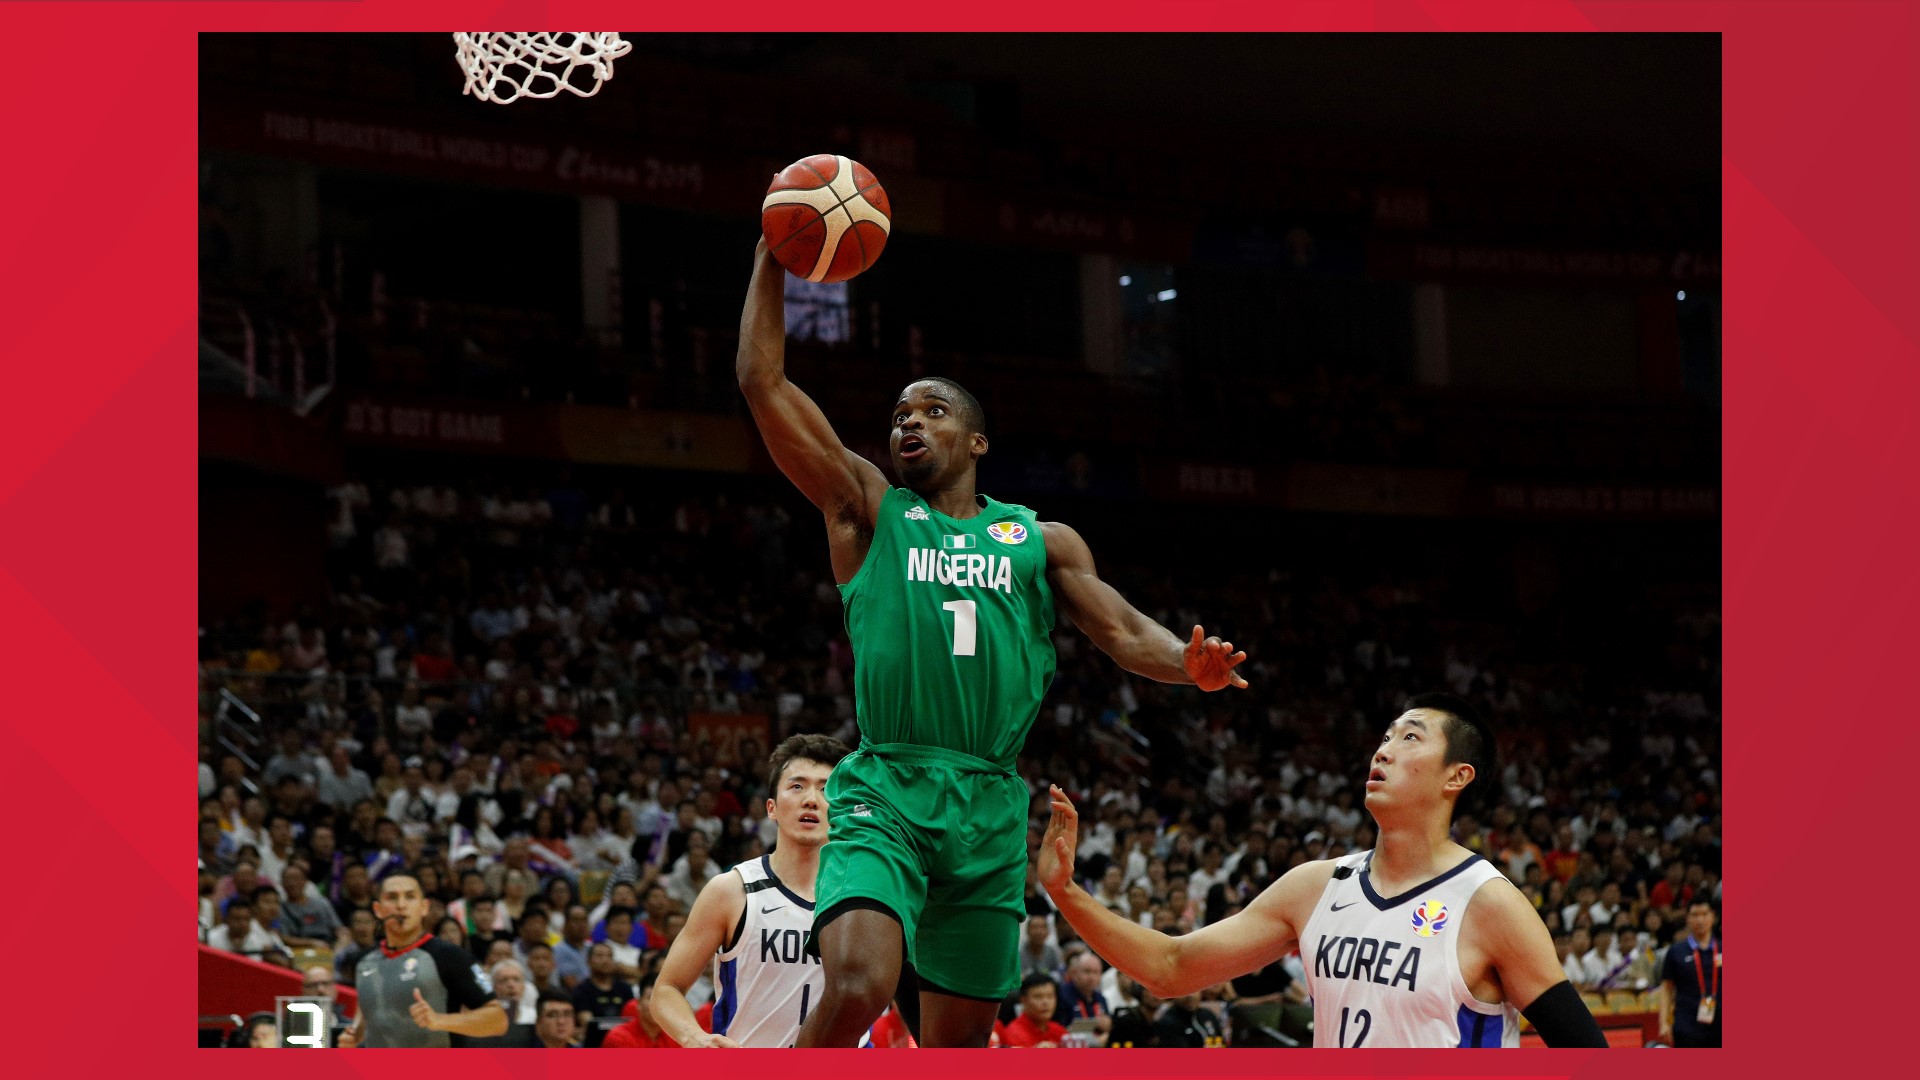 Iroegbu is on Nigeria's current roster hoping to make the 12 man Olympic team. He hit some big shots to help Nigeria beat Team USA recently.